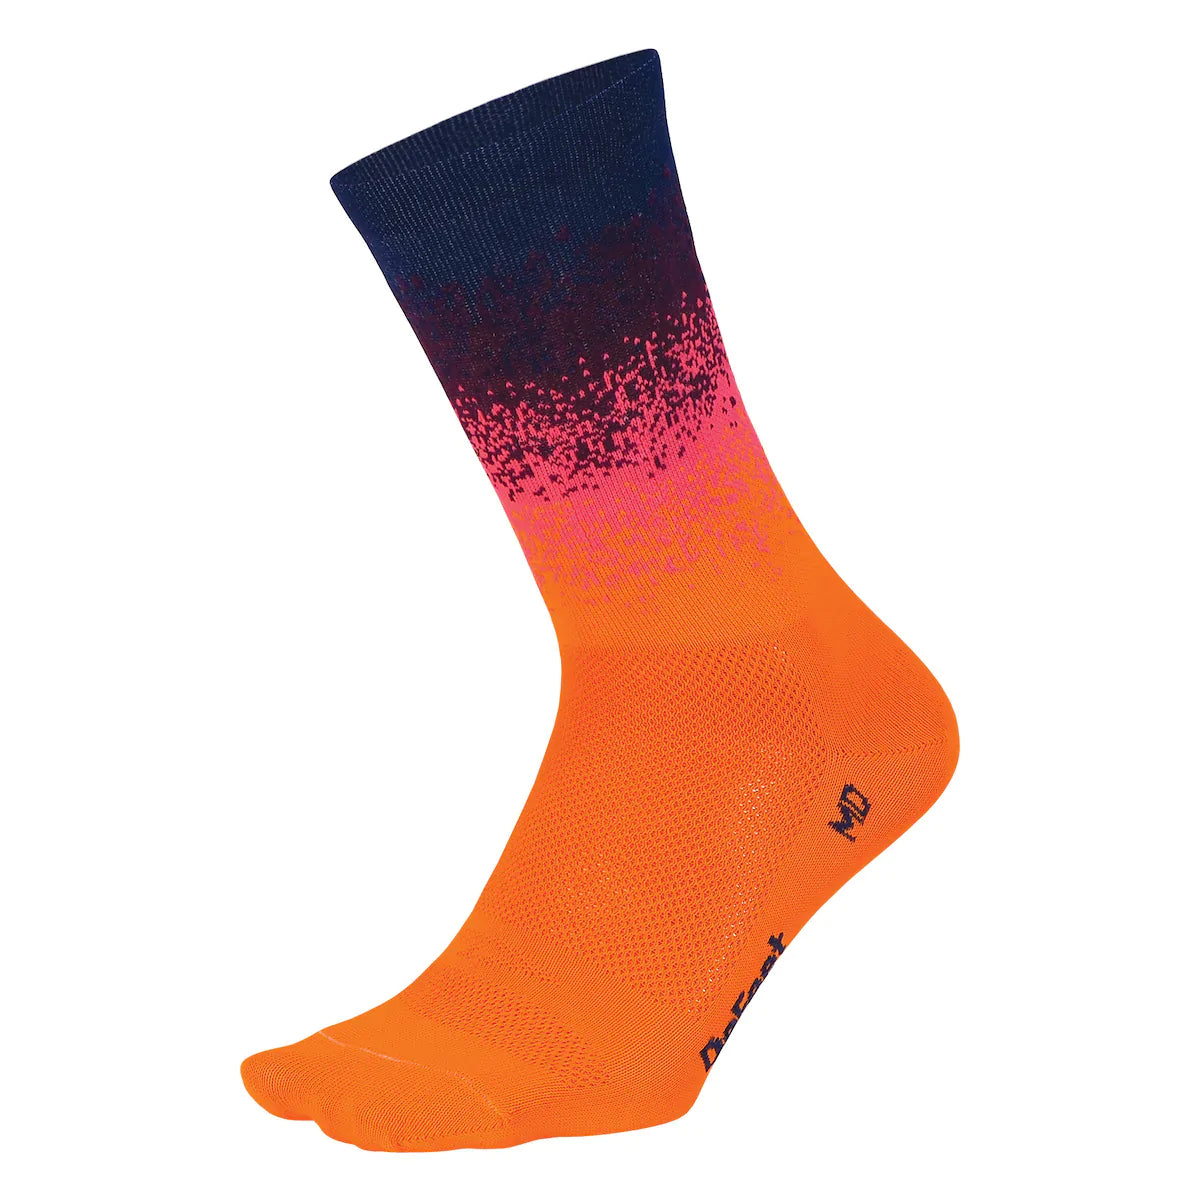 DeFeet Aireator Barnstormer Ombre cycling sock featuring a 6" cuff and a design of bands of color fading from navy blue to pink to orange.